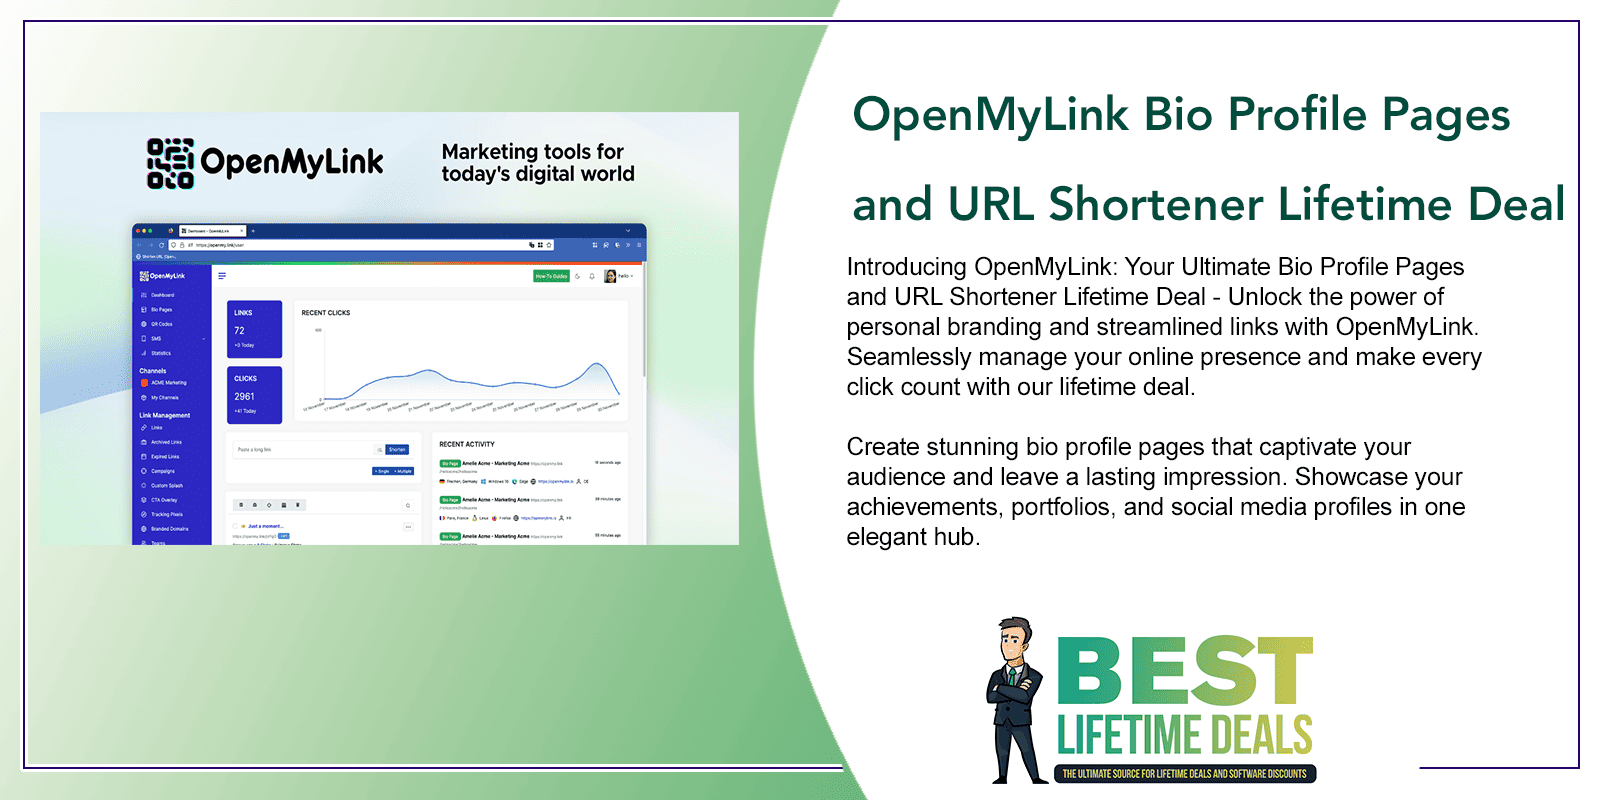 OpenMyLink Bio Profile Pages and URL Shortener Lifetime Deal Featured Image